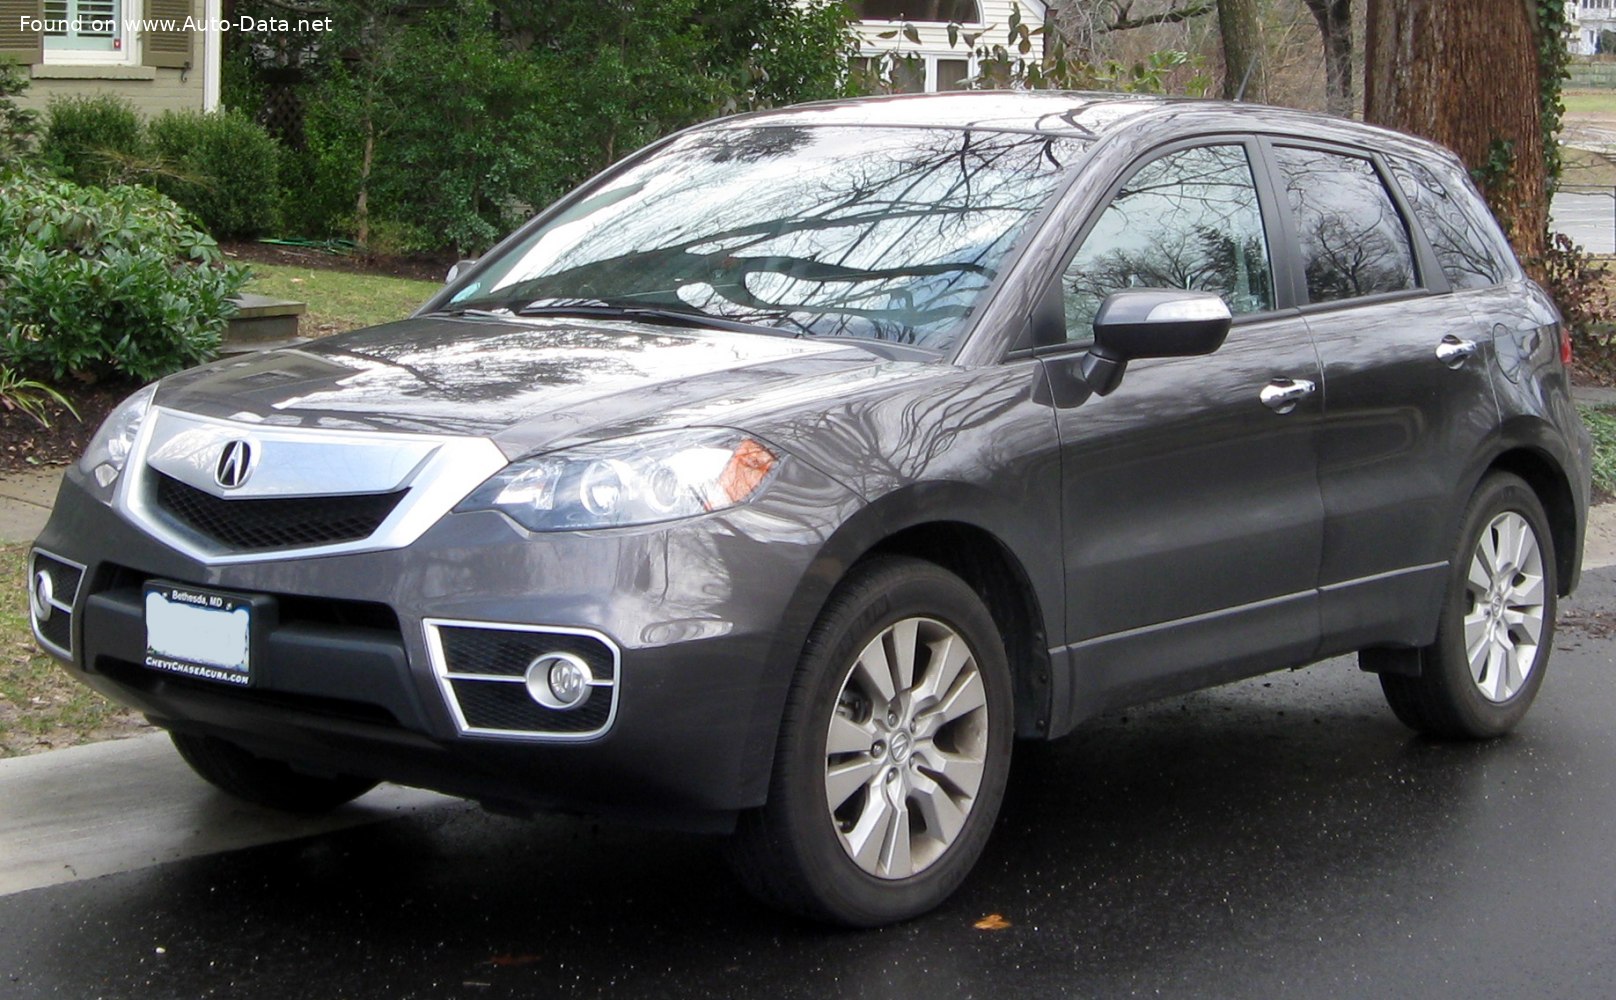 2009 Acura RDX I (facelift 2009) 2.3 (240 Hp) AWD Automatic | Technical  specs, data, fuel consumption, Dimensions